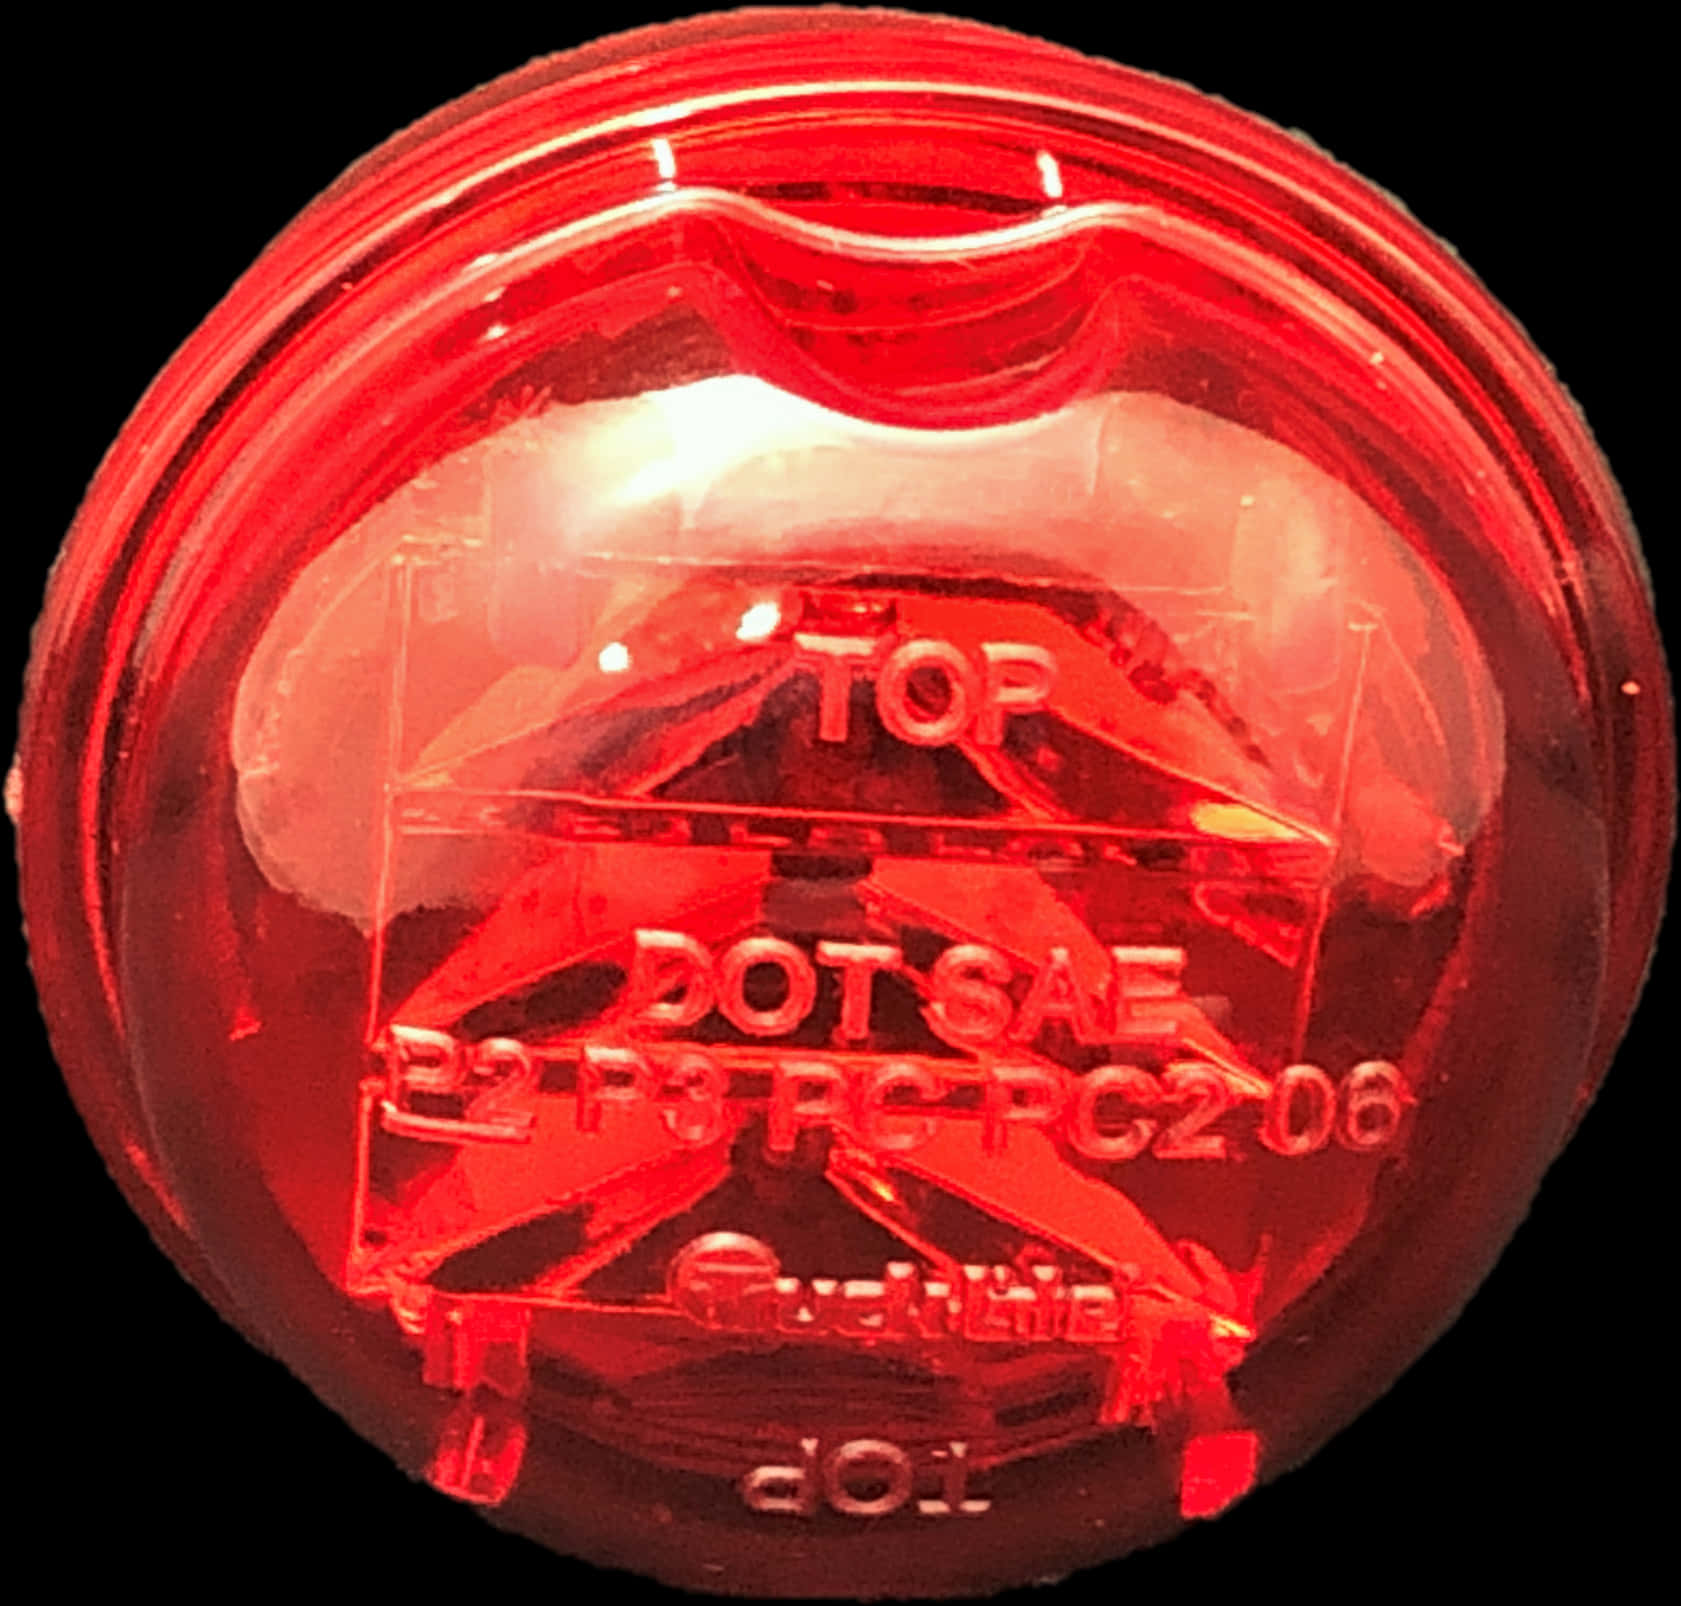 A Red Light With Text On It